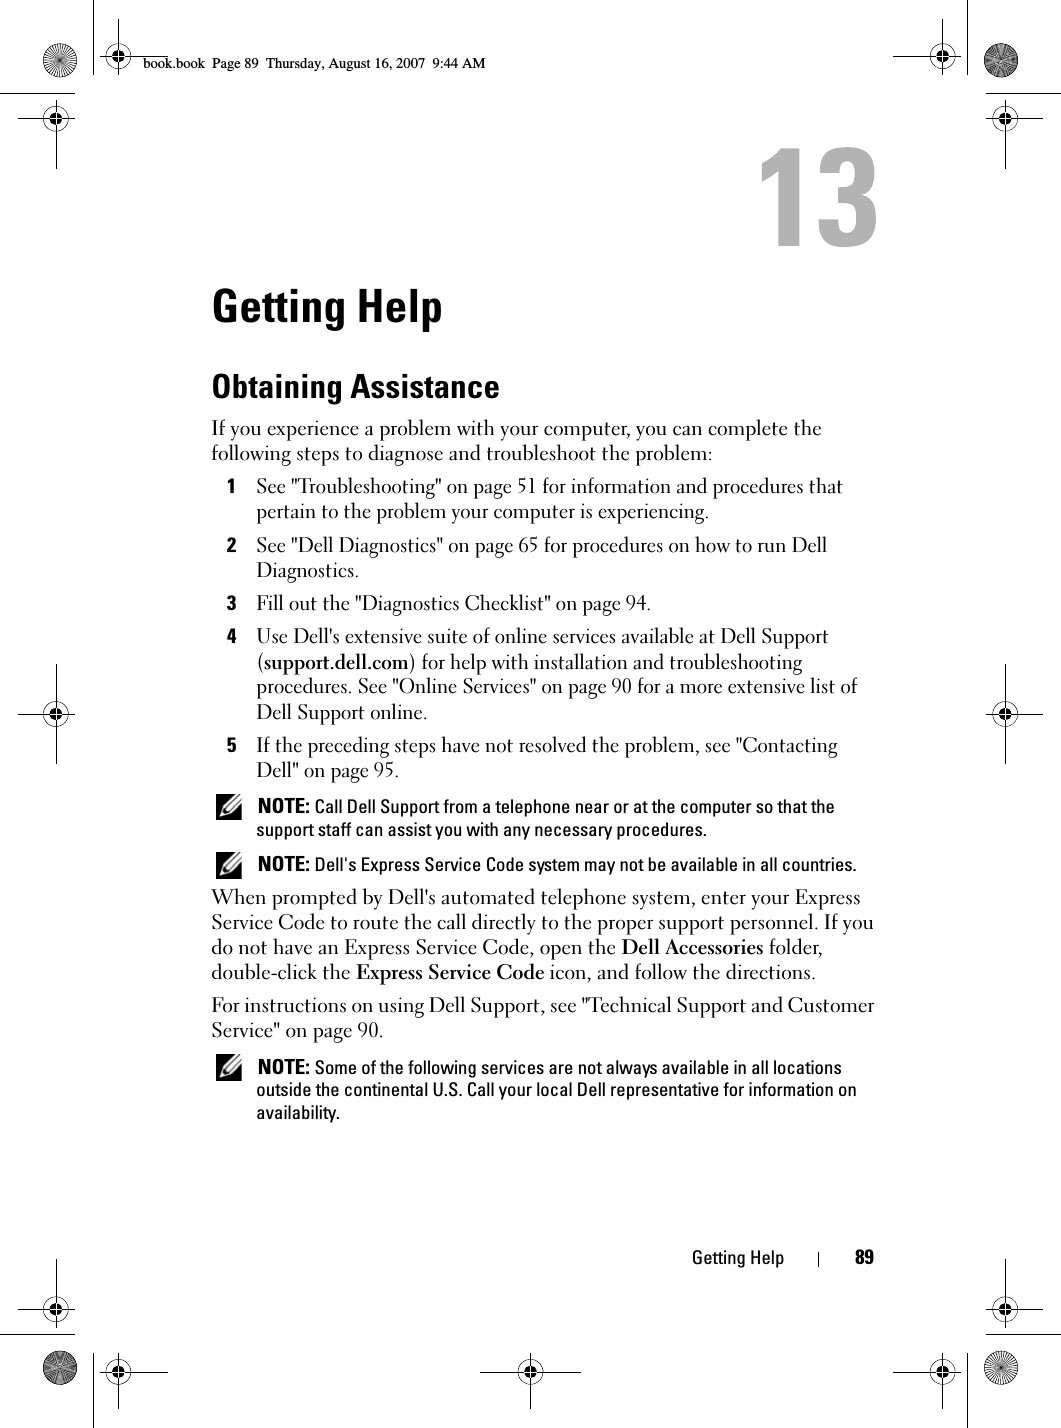 Getting Help 89Getting HelpObtaining AssistanceIf you experience a problem with your computer, you can complete the following steps to diagnose and troubleshoot the problem:1See &quot;Troubleshooting&quot; on page 51 for information and procedures that pertain to the problem your computer is experiencing.2See &quot;Dell Diagnostics&quot; on page 65 for procedures on how to run Dell Diagnostics.3Fill out the &quot;Diagnostics Checklist&quot; on page 94.4Use Dell&apos;s extensive suite of online services available at Dell Support (support.dell.com) for help with installation and troubleshooting procedures. See &quot;Online Services&quot; on page 90 for a more extensive list of Dell Support online.5If the preceding steps have not resolved the problem, see &quot;Contacting Dell&quot; on page 95. NOTE: Call Dell Support from a telephone near or at the computer so that the support staff can assist you with any necessary procedures. NOTE: Dell&apos;s Express Service Code system may not be available in all countries.When prompted by Dell&apos;s automated telephone system, enter your Express Service Code to route the call directly to the proper support personnel. If you do not have an Express Service Code, open the Dell Accessories folder, double-click the Express Service Code icon, and follow the directions.For instructions on using Dell Support, see &quot;Technical Support and Customer Service&quot; on page 90. NOTE: Some of the following services are not always available in all locations outside the continental U.S. Call your local Dell representative for information on availability.book.book  Page 89  Thursday, August 16, 2007  9:44 AM